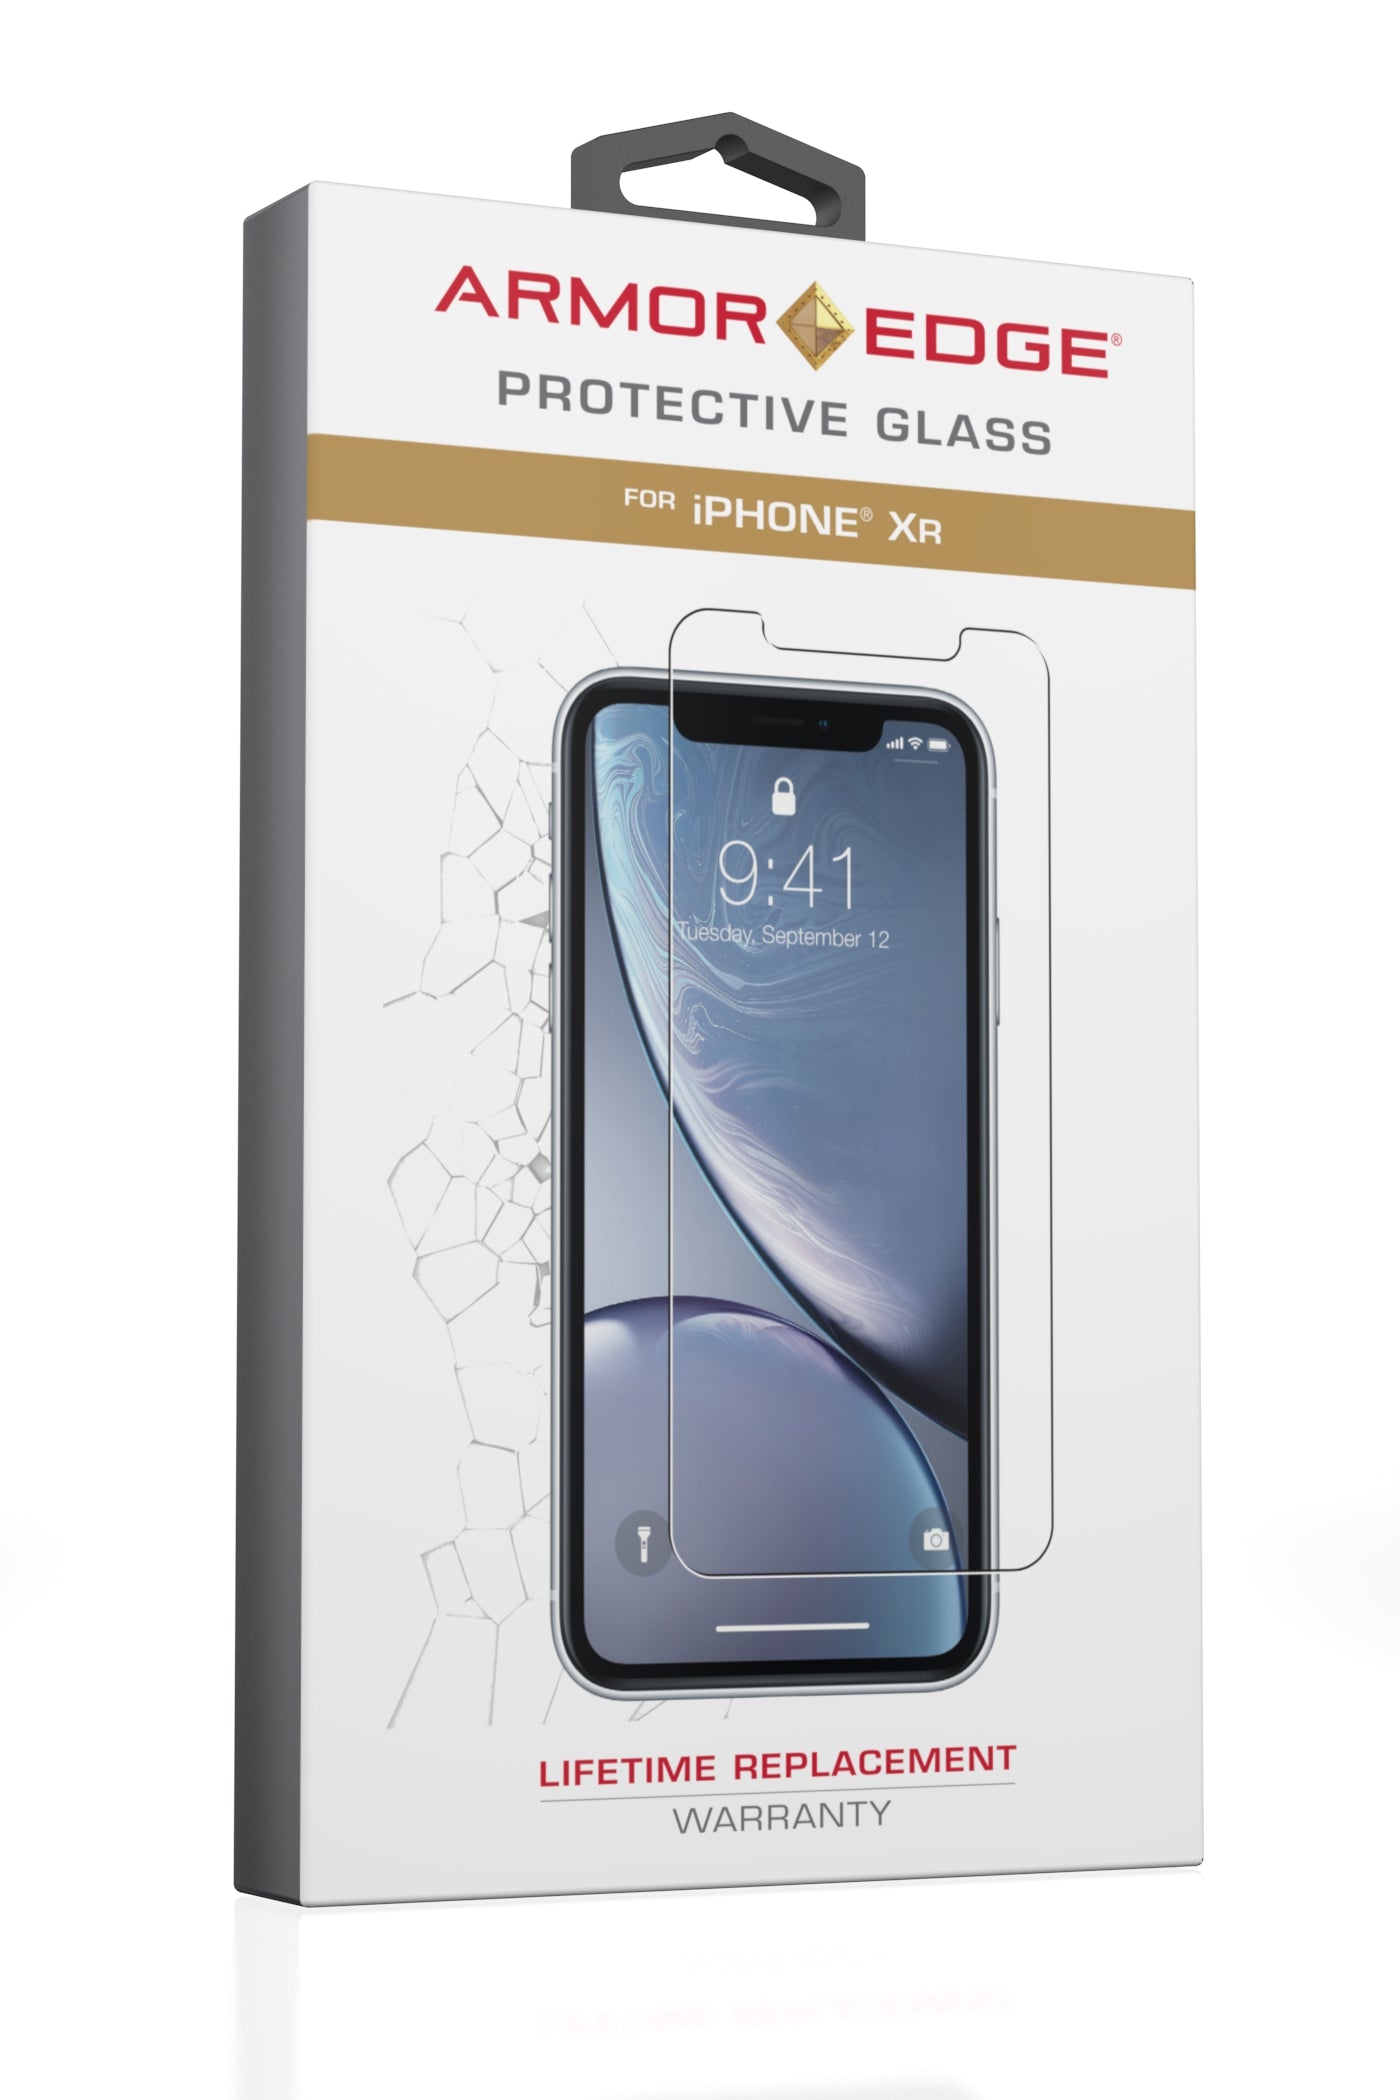 Armor Edge - Protective Glass for iPhone XR